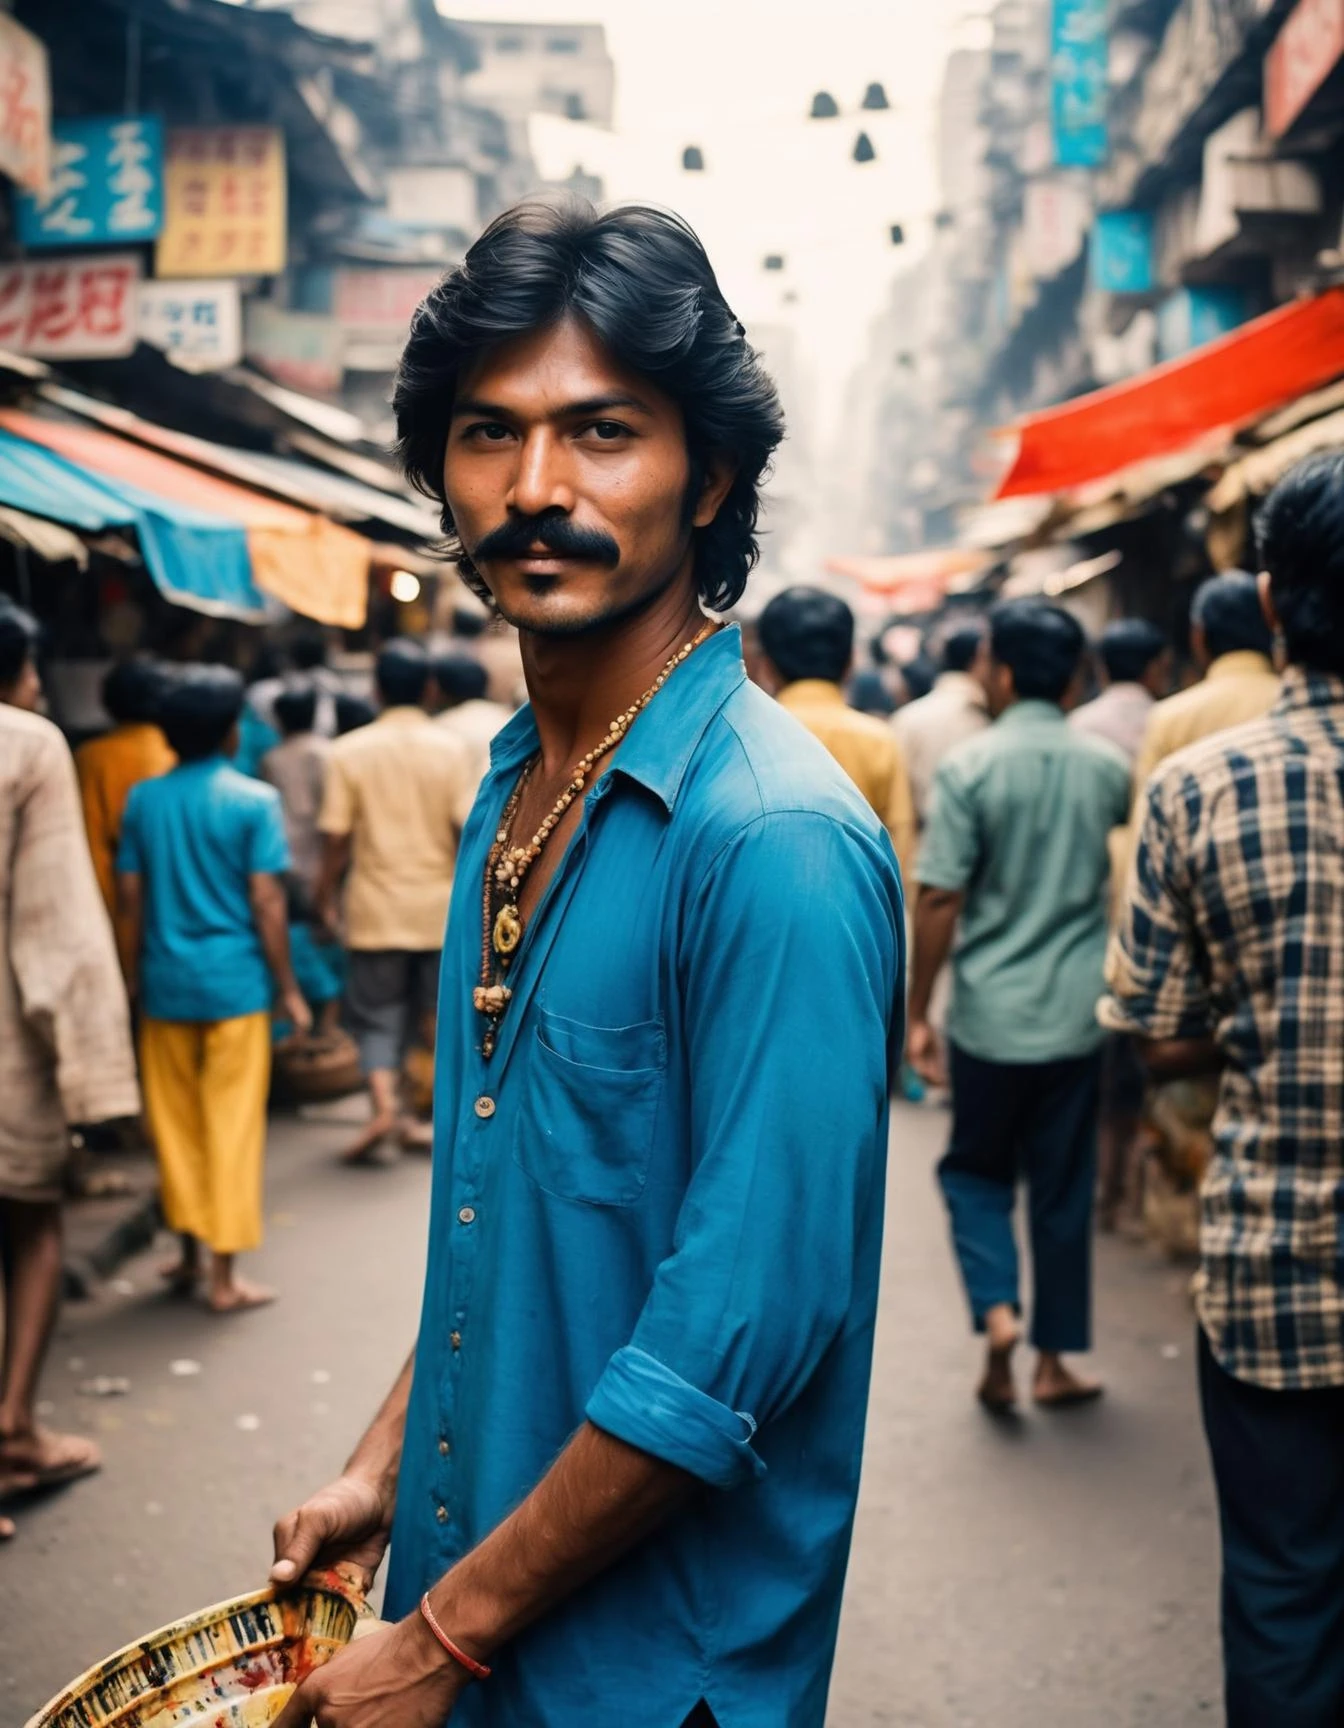 cinematic photo Immersed in the vibrant energy of a bustling marketplace in 70s Mumbai, ((man)) is captured in a lively watercolor painting. The flat, colorful patterns and prominent brush strokes are a hallmark of the artists Yoshitaka Amano and Takato Yamamoto. . 35mm photograph, film, bokeh, professional, 4k, highly detailed